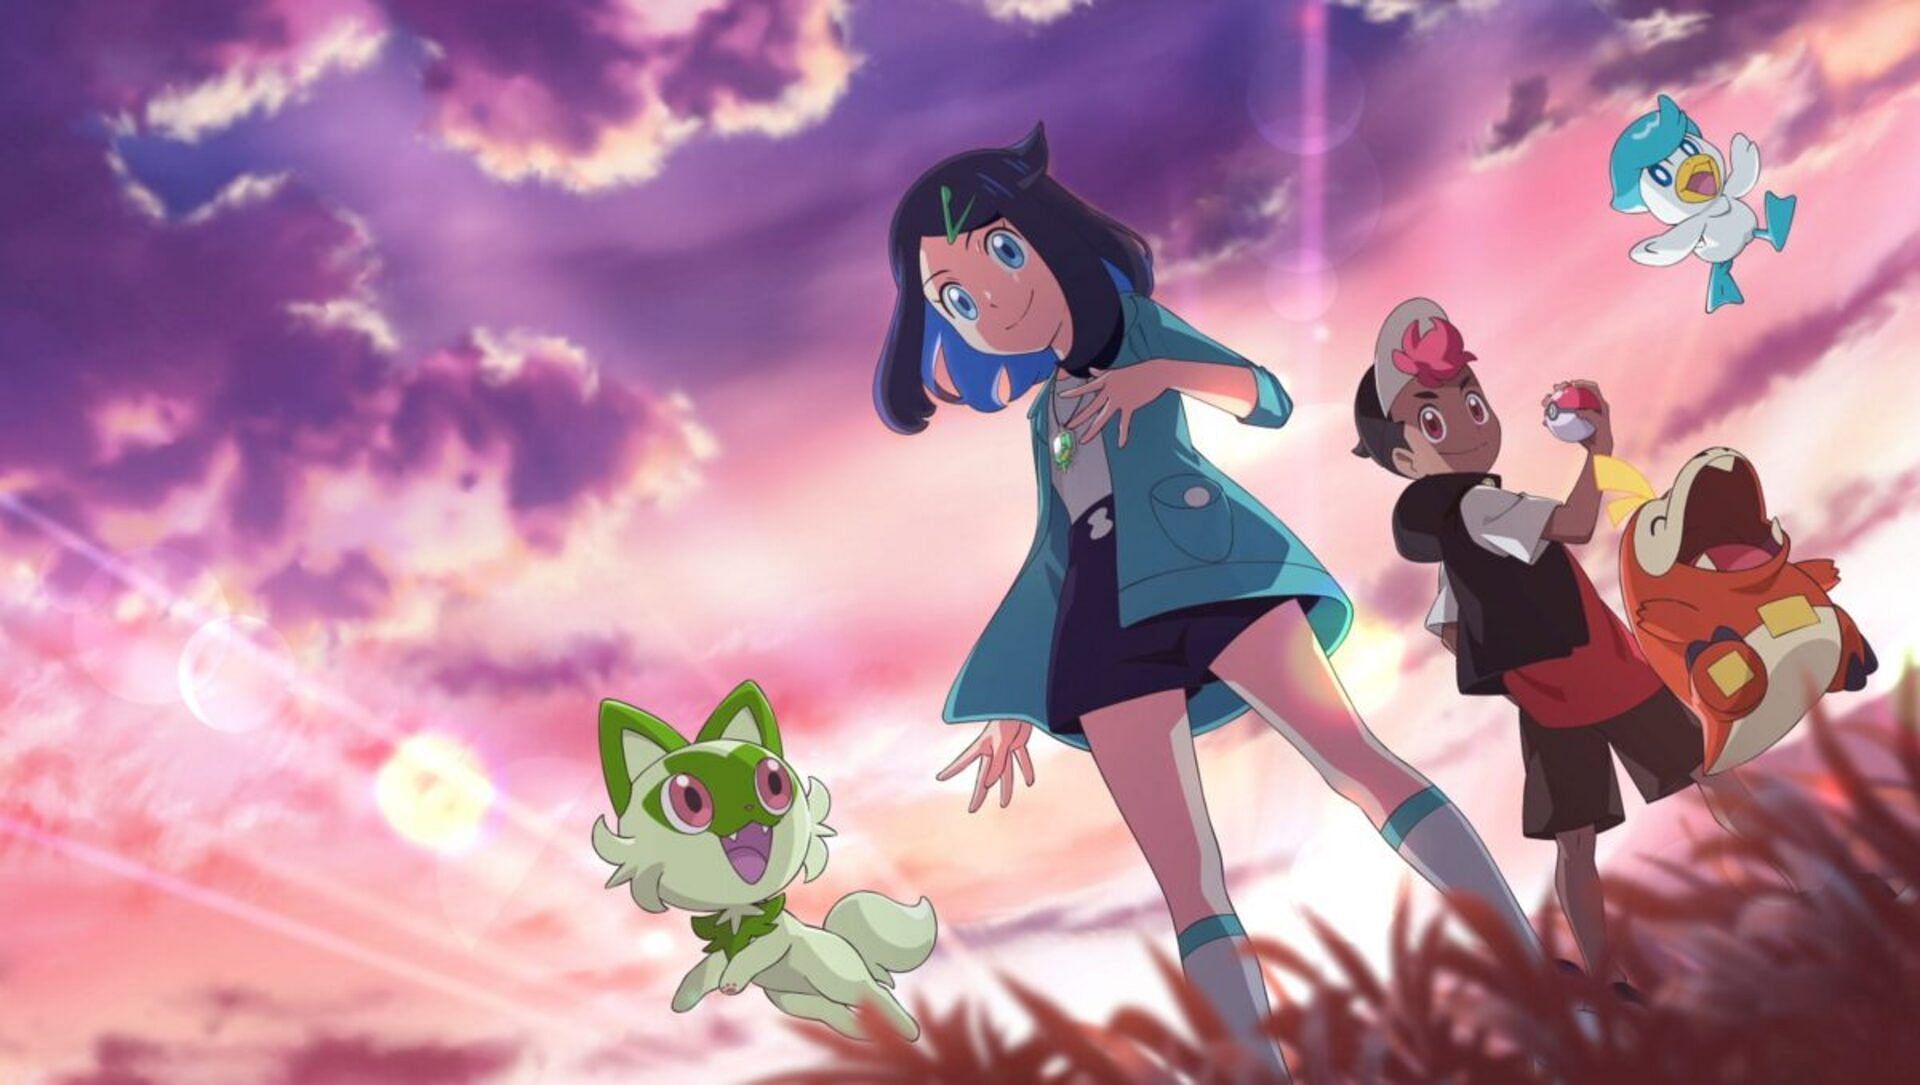 The new Pokemon anime is slated for release in April 2023 (Image via OLM)